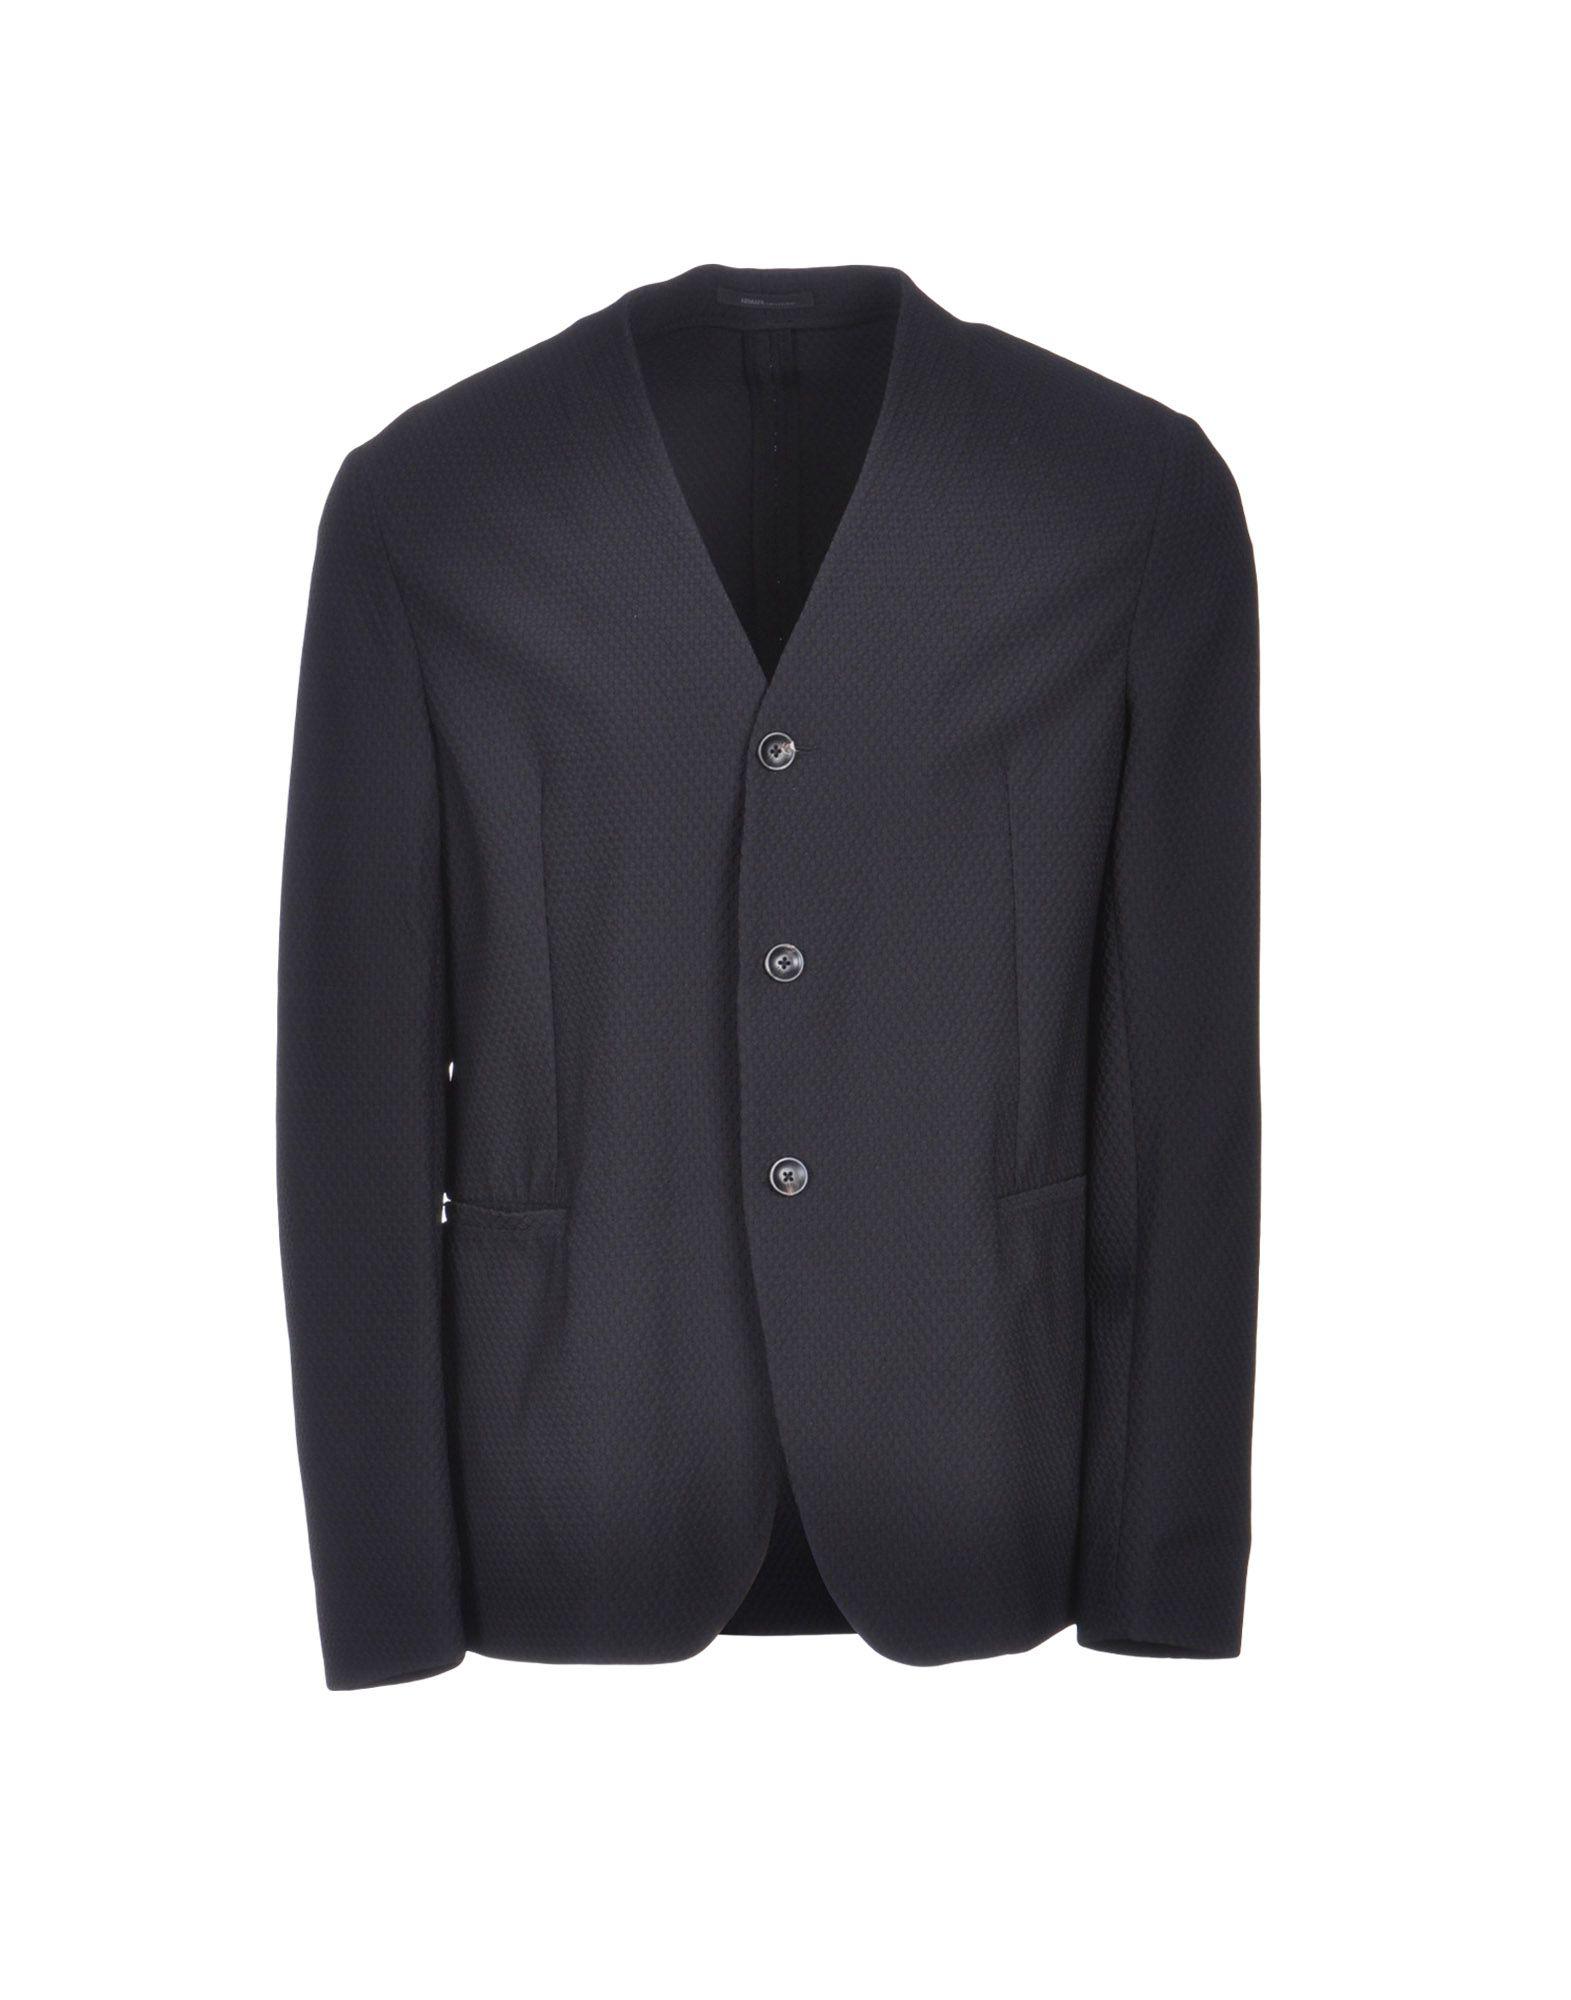 Armani Synthetic Suit Jacket in Black for Men - Lyst